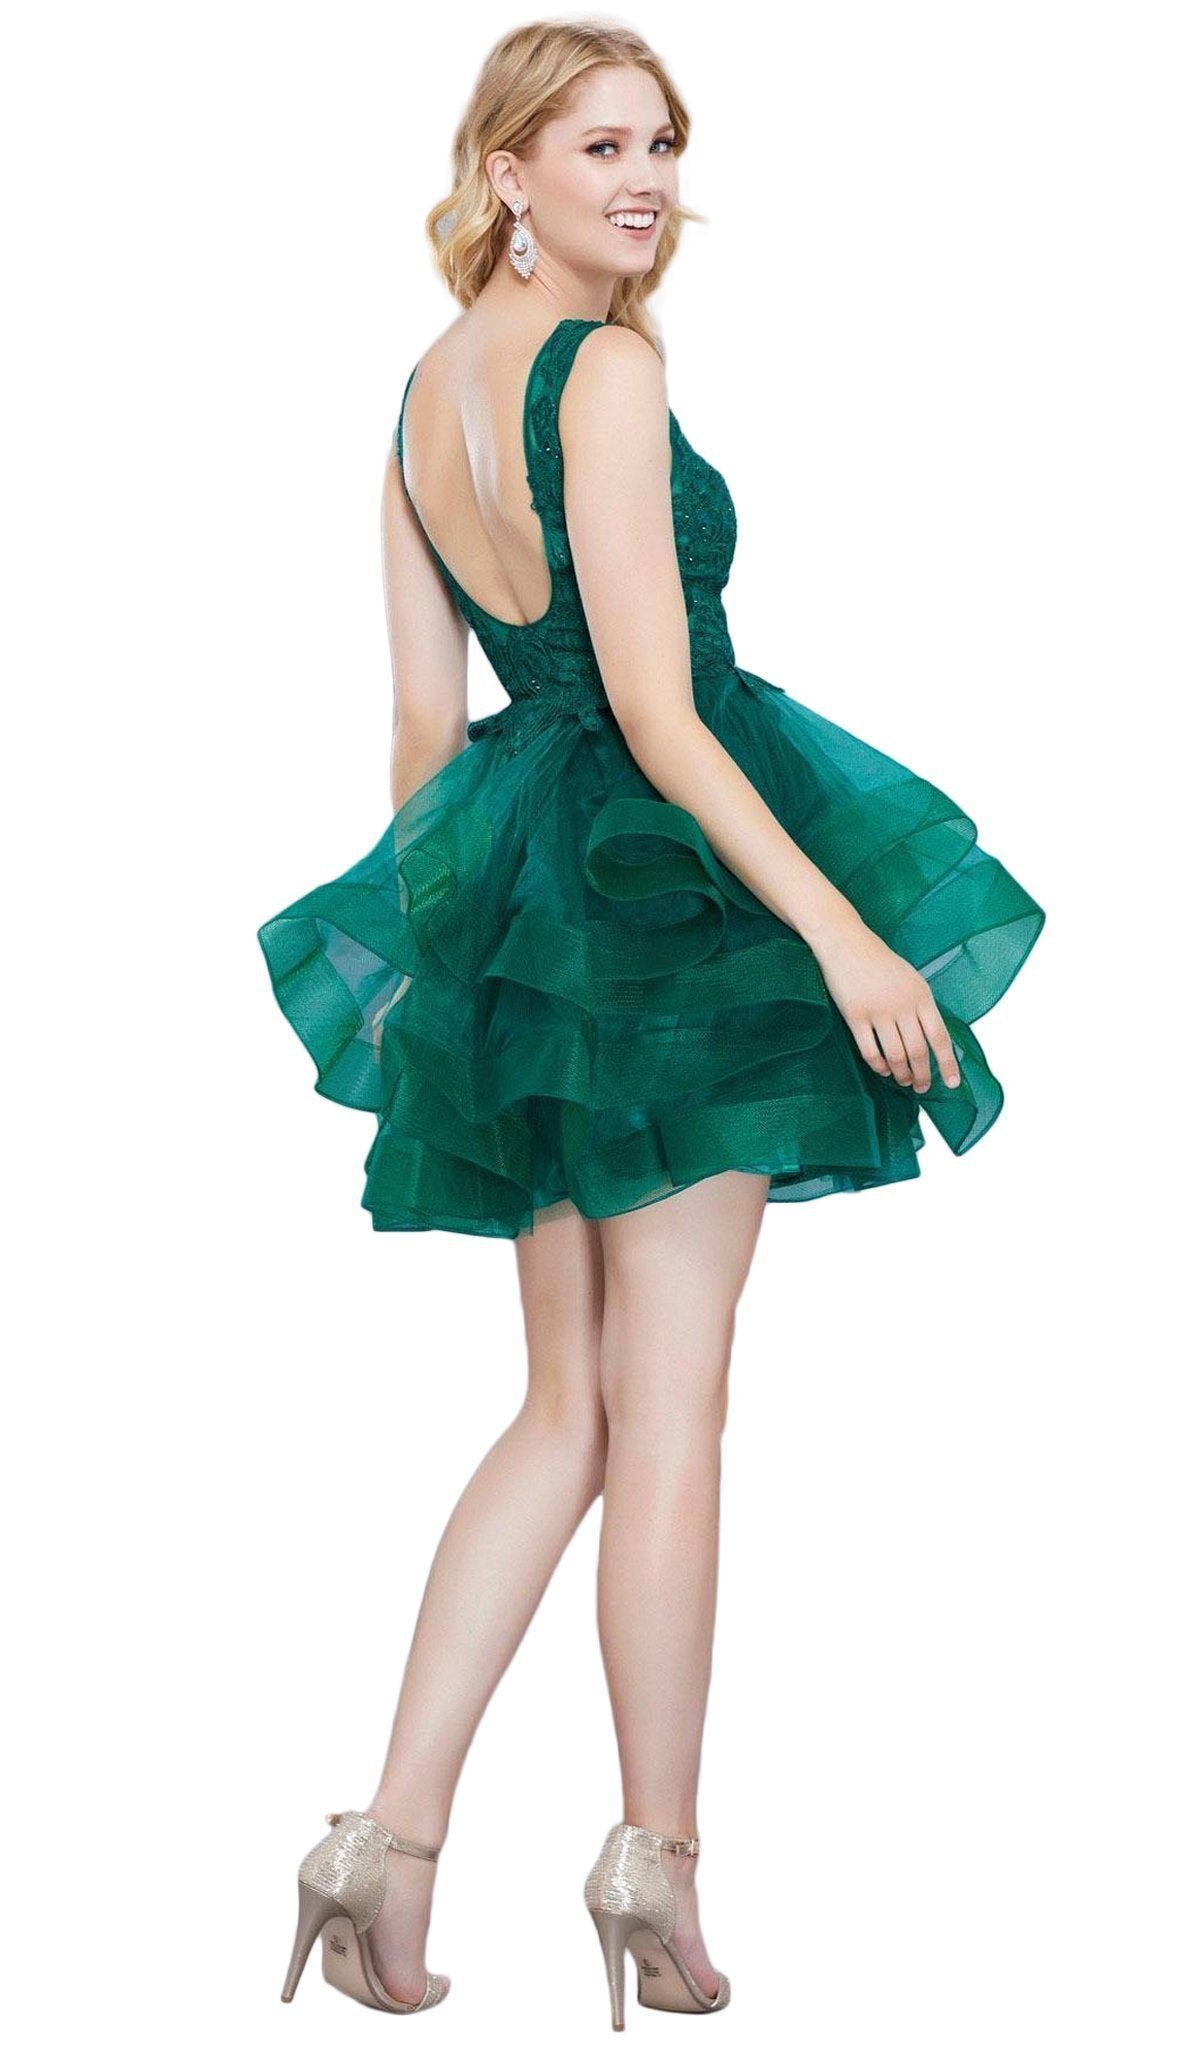 Nox Anabel - 6310 Ruffled V-neck A-line Dress Special Occasion Dress